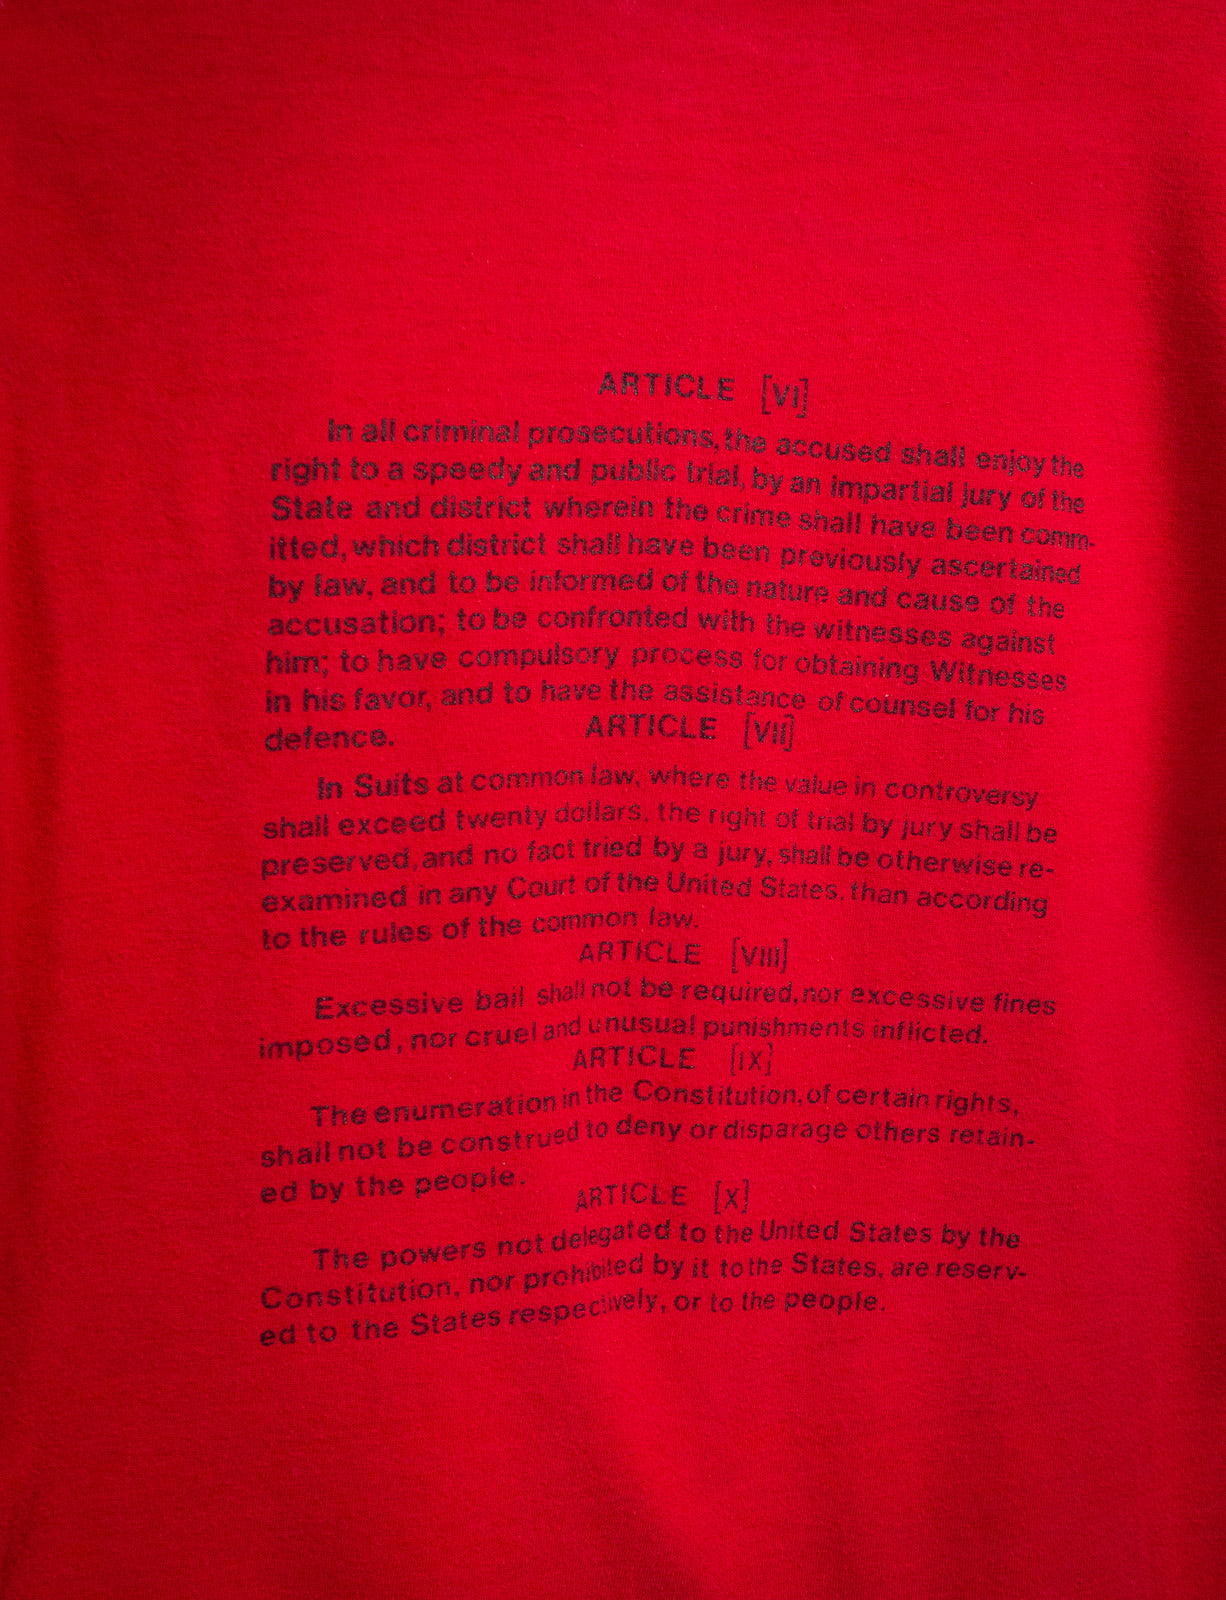 Vintage Bill of Rights Graphic T Shirt 80s Red Small